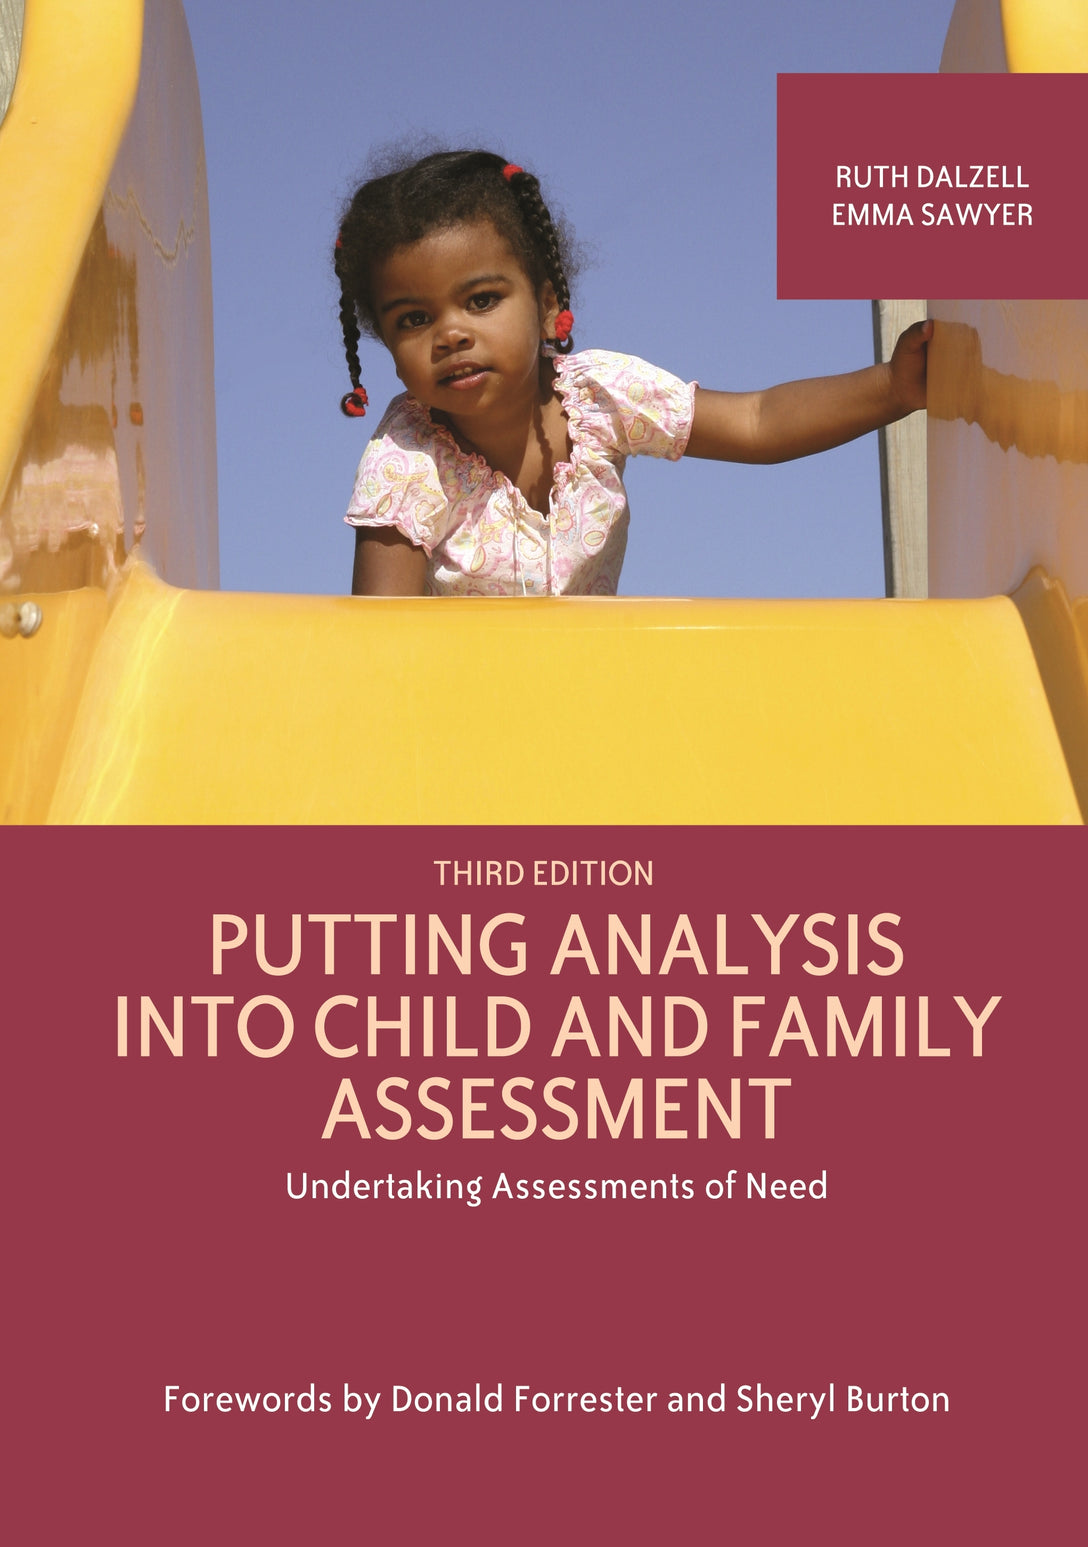 Putting Analysis Into Child and Family Assessment, Third Edition by Donald Forrester, Sheryl Burton, Emma Sawyer, Ruth Dalzell